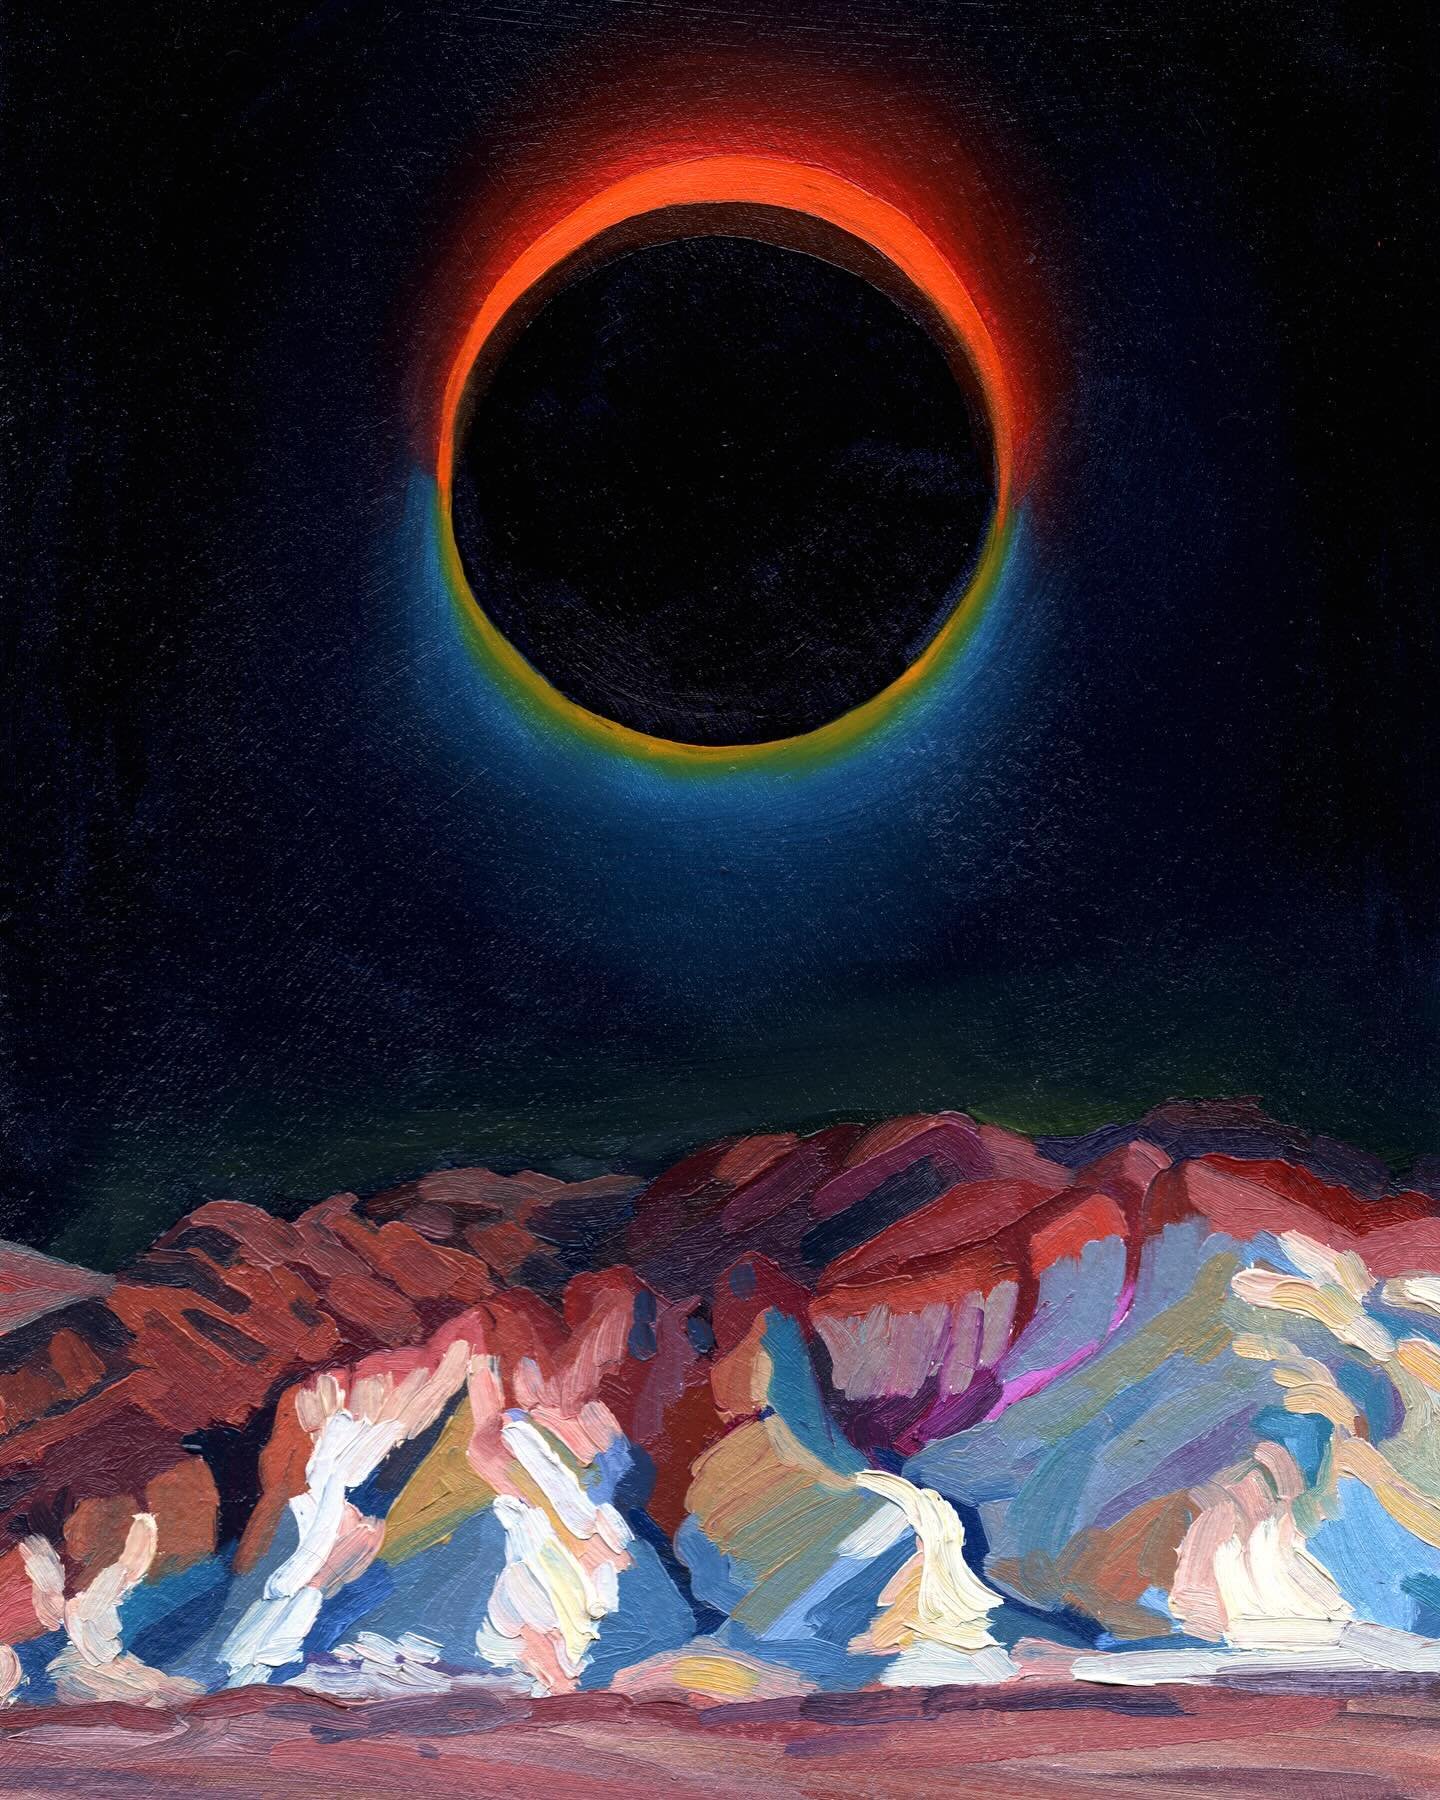 I released a special new print in celebration of the solar eclipse today. 
The original painting was done with oil on panel. The print can be made on cotton hot press paper or cotton canvas in a wide range of sizes (always giclee). 

Find it on my we